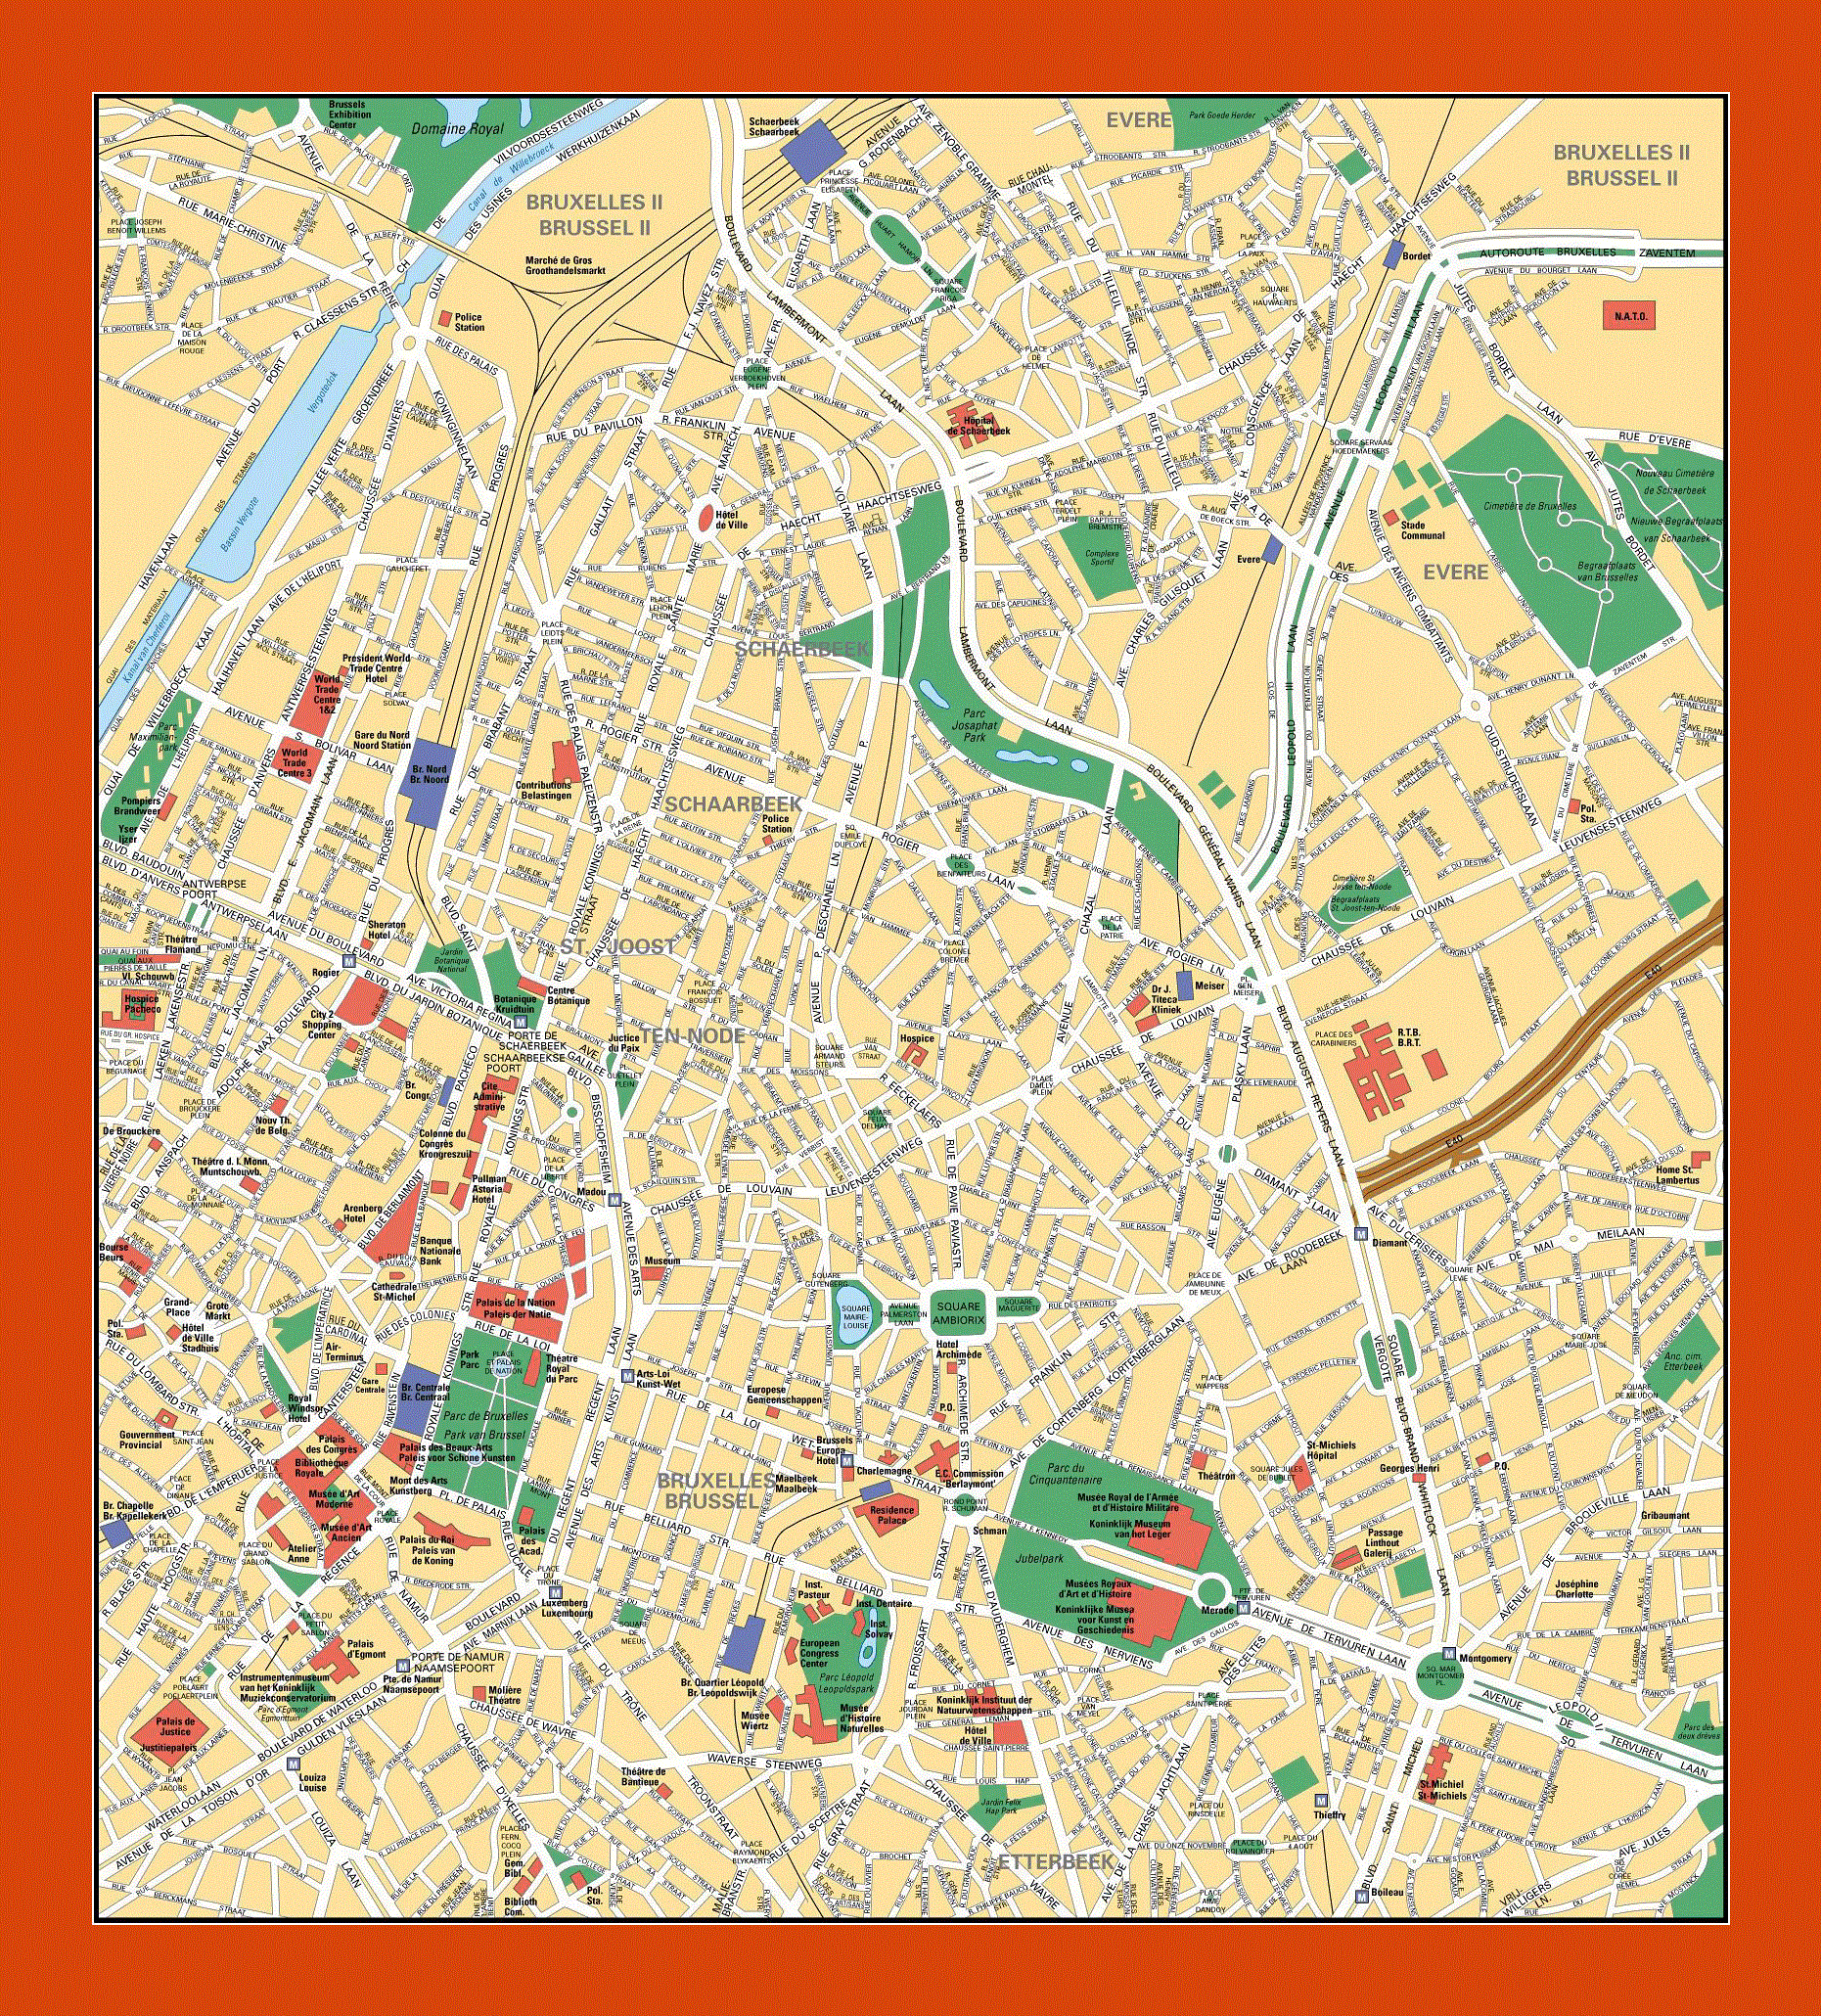 Road map of Brussels city center | Maps of Brussels | Maps of Belgium ...